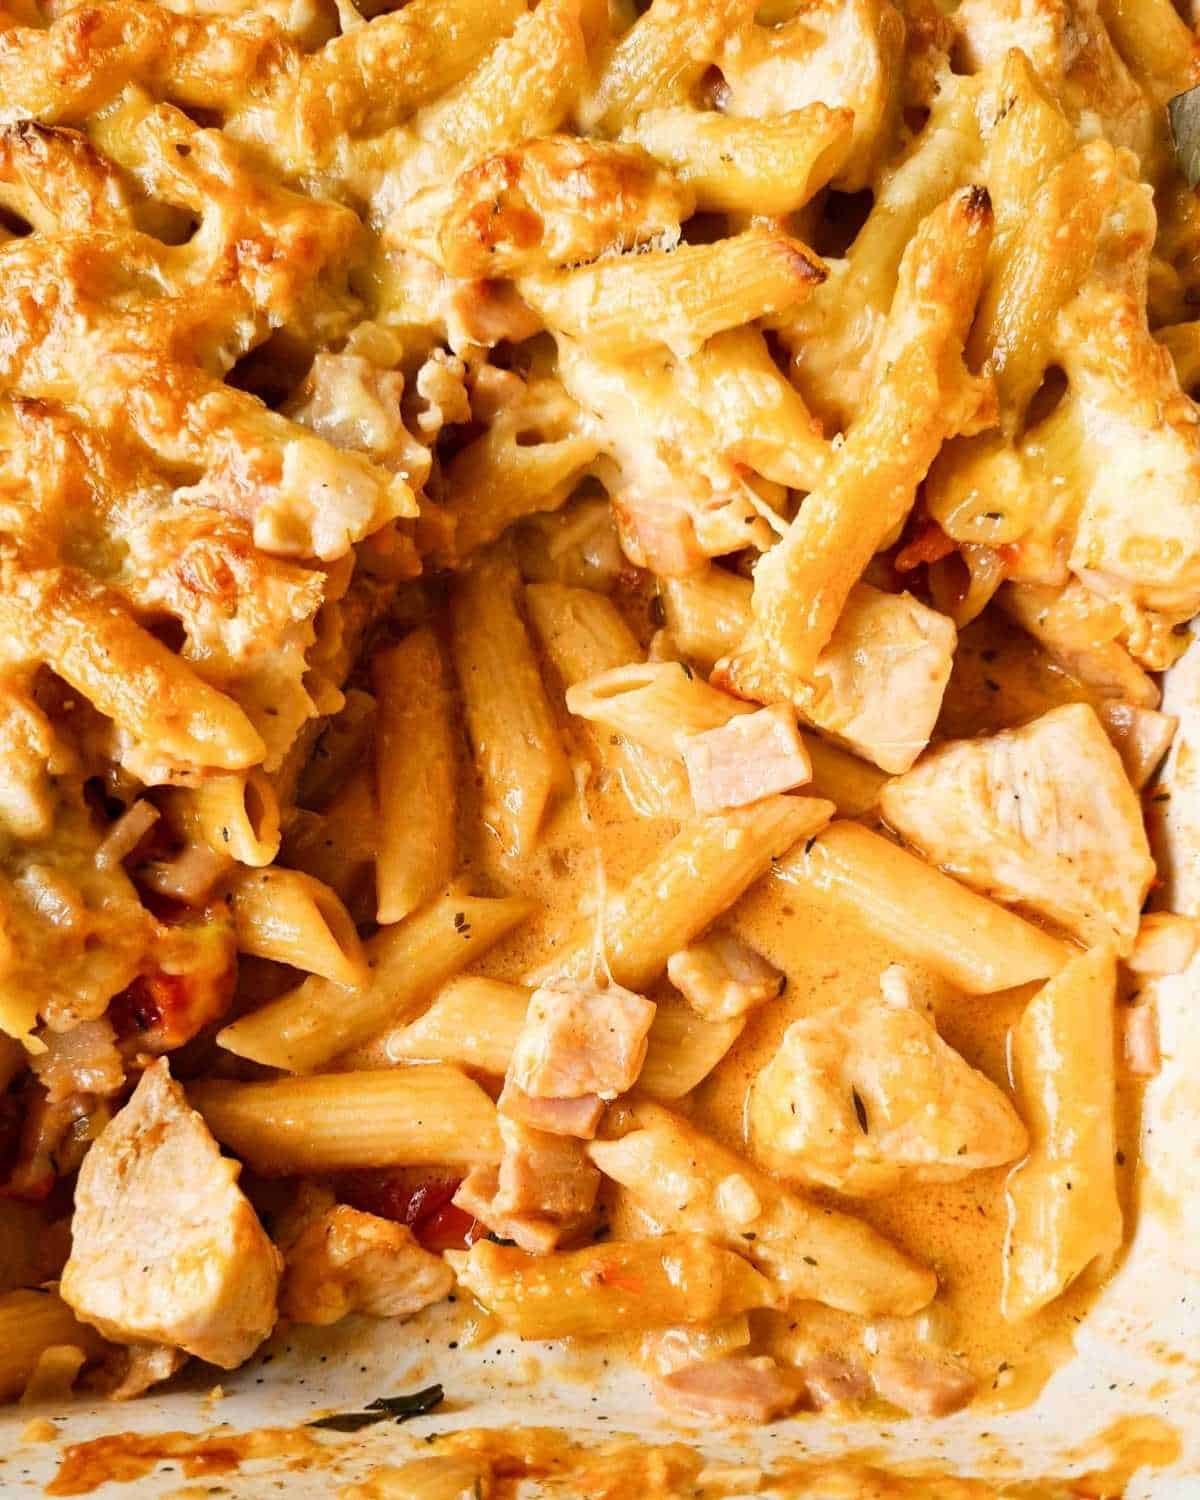 Close up of a tray of creamy pasta bake with a few scoops taken out of the tray